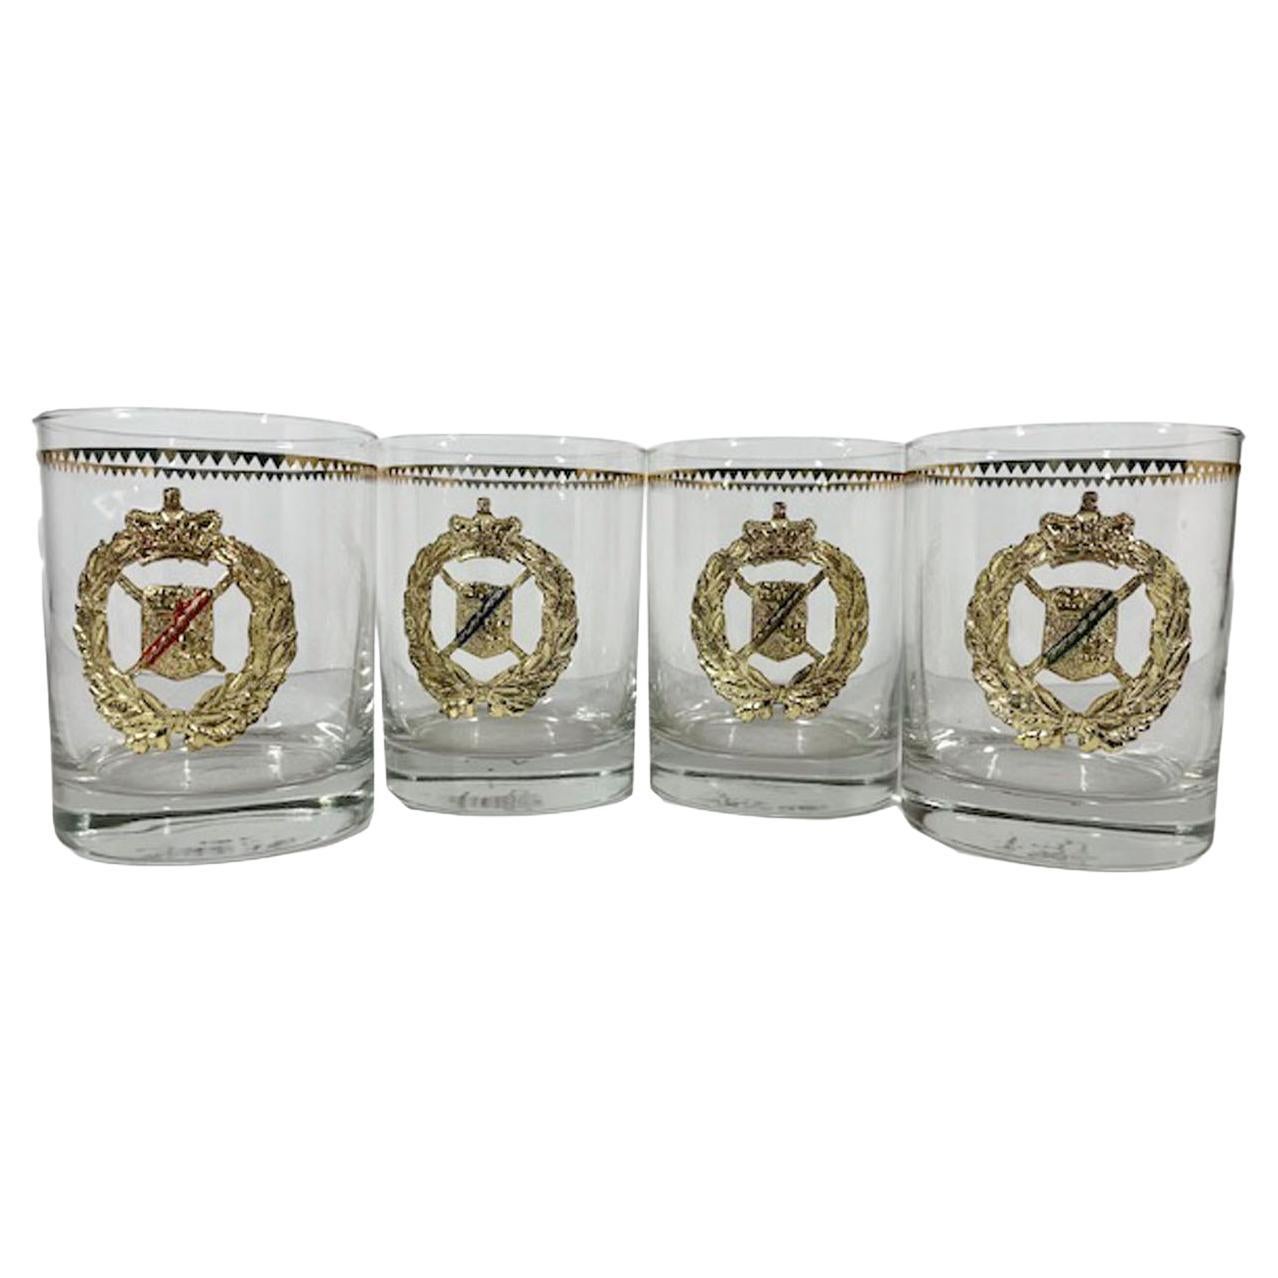 Four Vintage Georges Briard Rocks Glasses with Applied Gilt Metal Coats-of-Arms